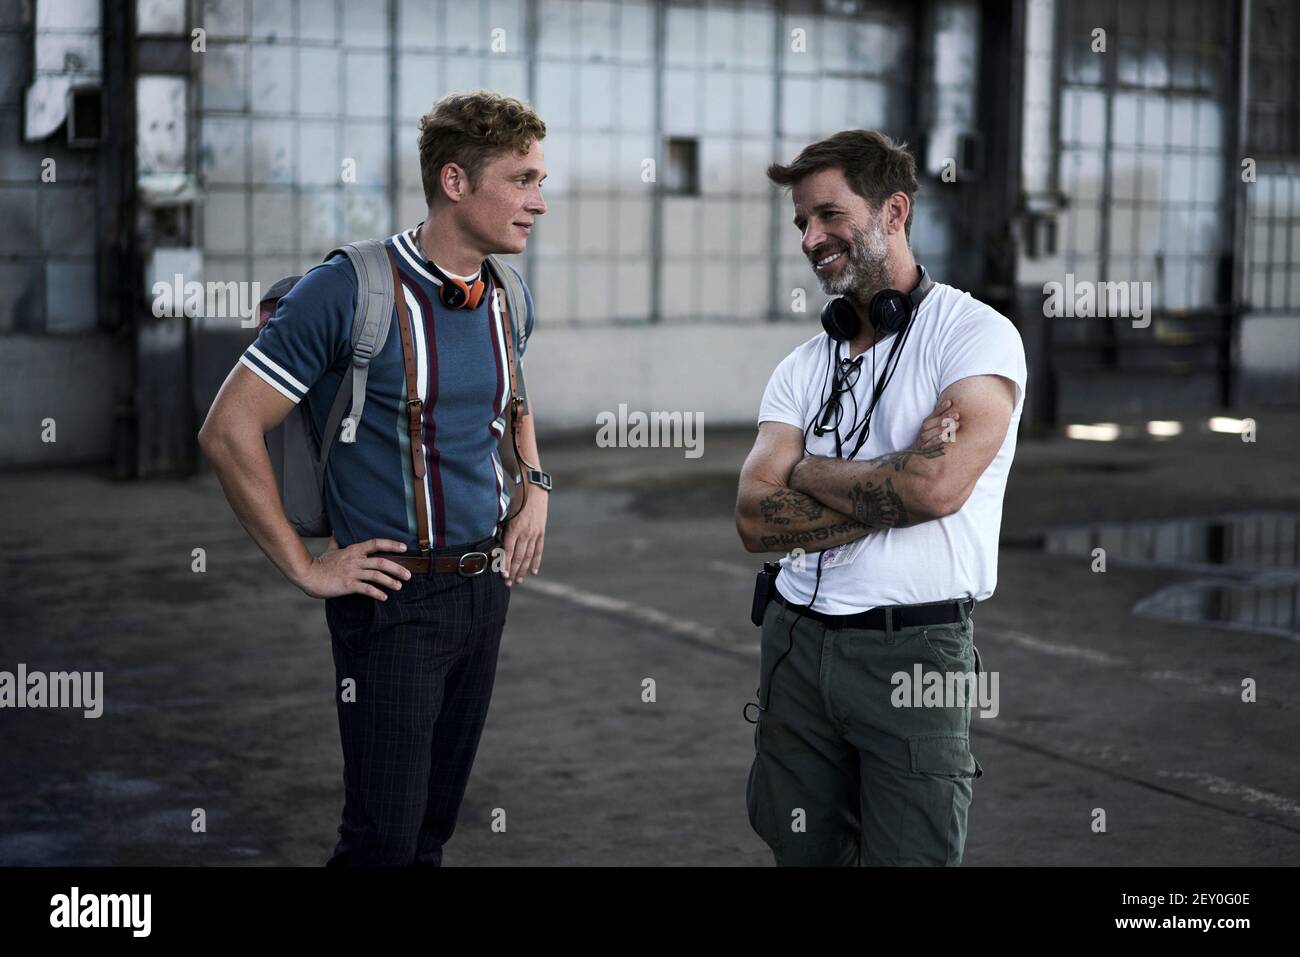 ZACK SNYDER and MATTHIAS SCHWEIGHÖFER in ARMY OF THE DEAD (2021), directed by ZACK SNYDER. Credit: THE STONE QUARRY / Album Stock Photo